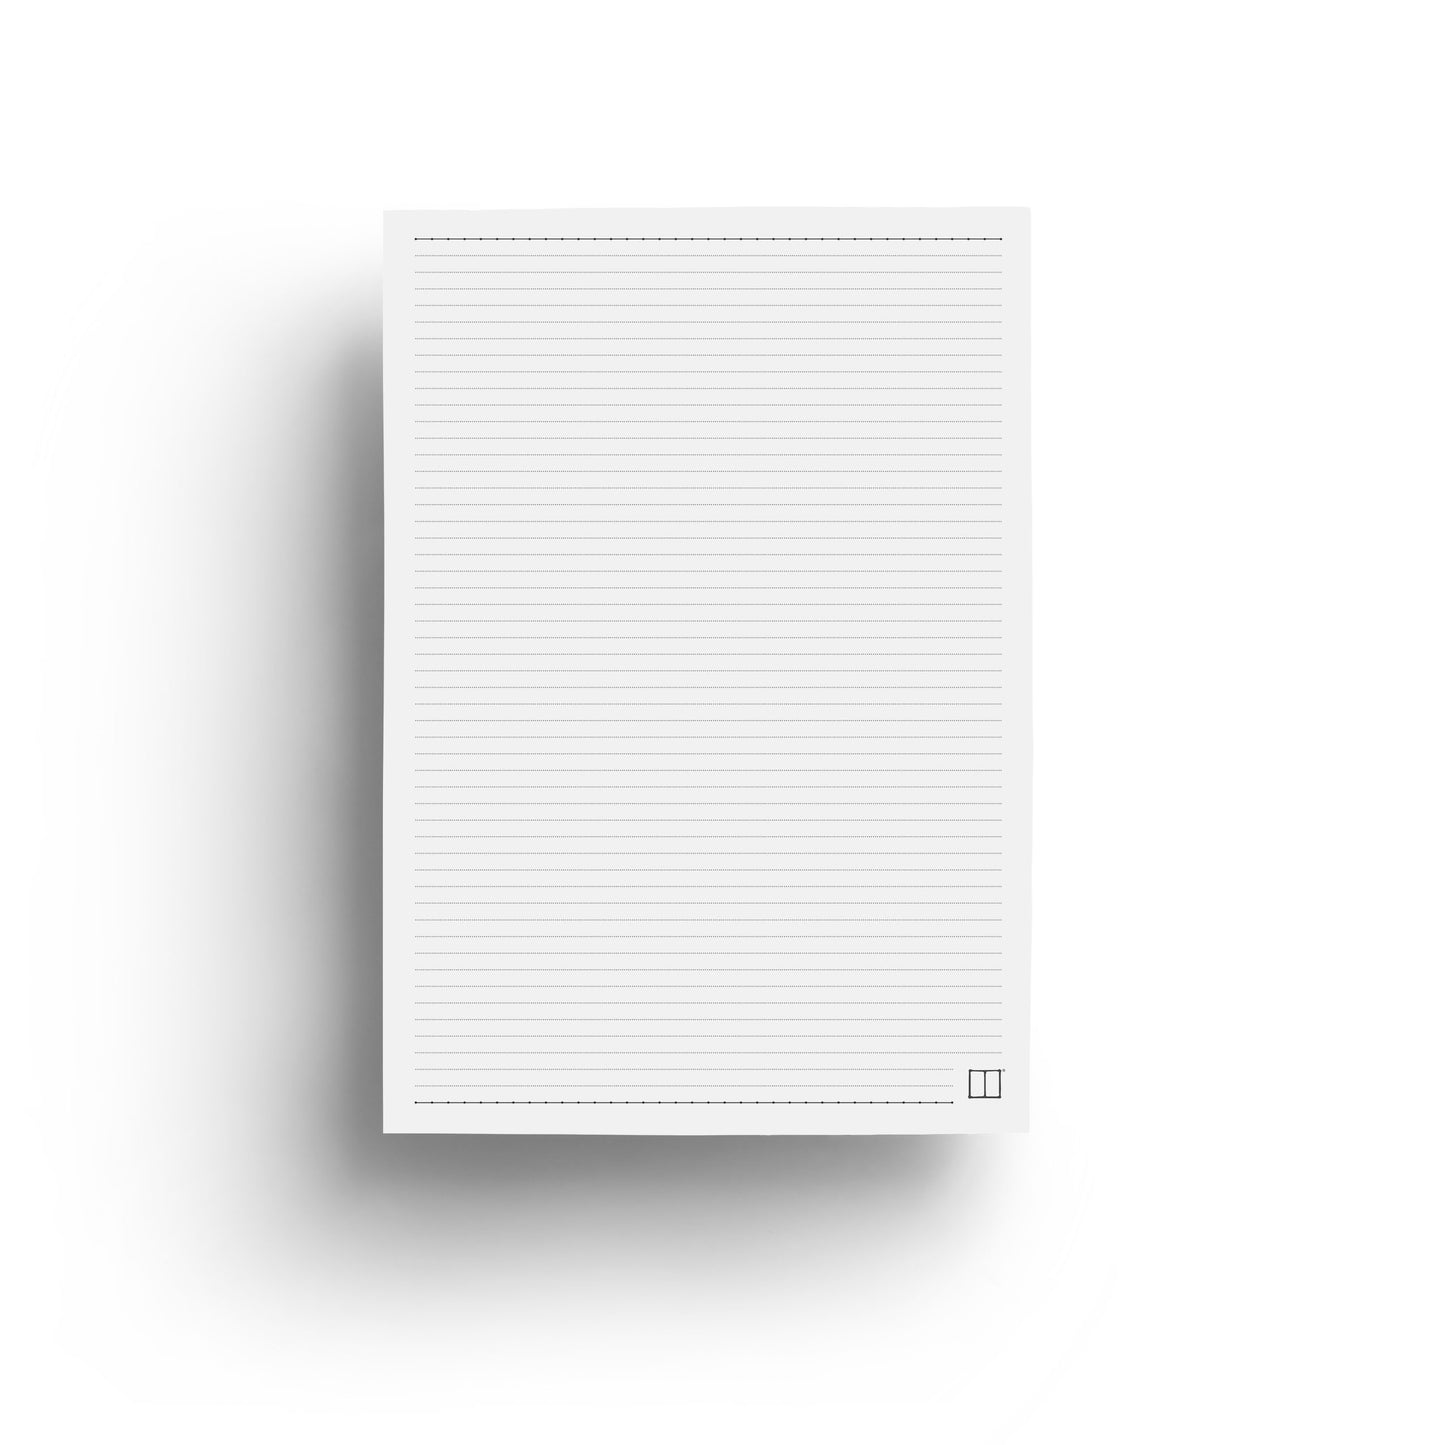 Paper Pack - 28 X 20 cm - 100 Sheets - (80 gm Lined White Paper) - from SketchBook Stationery